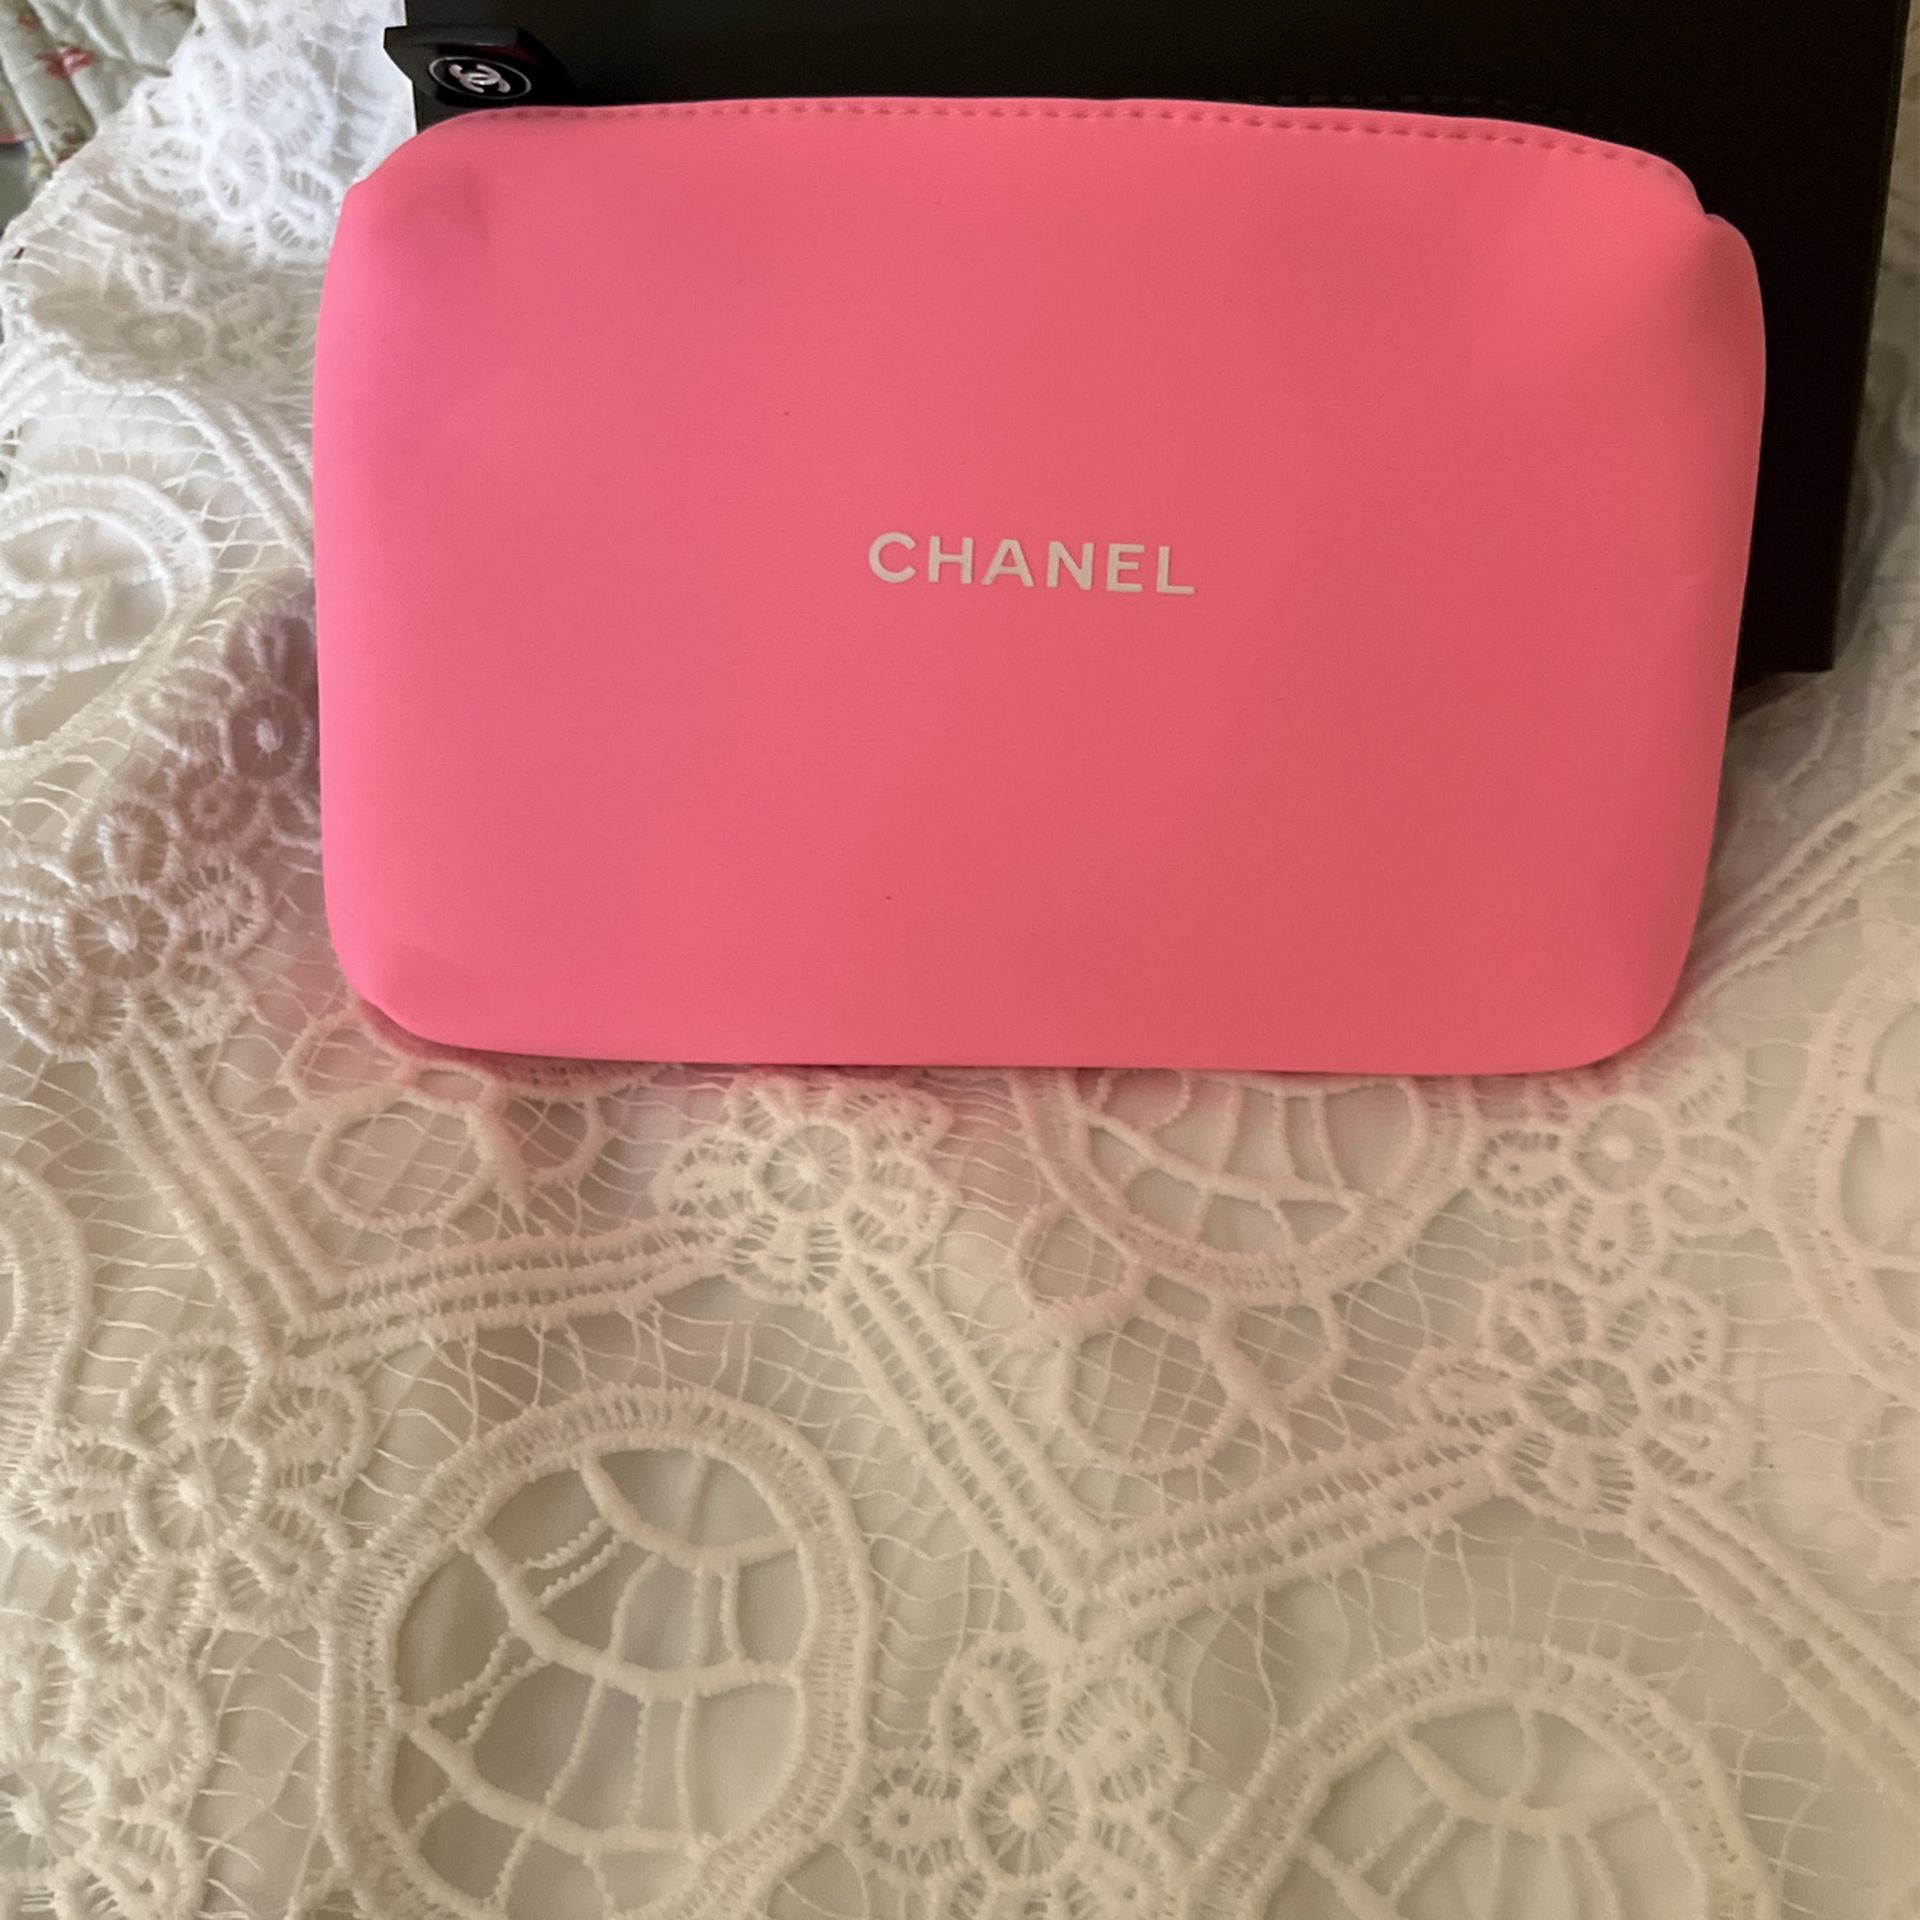 CHANEL MAKEUP BAG for Sale in Tucson, AZ - OfferUp